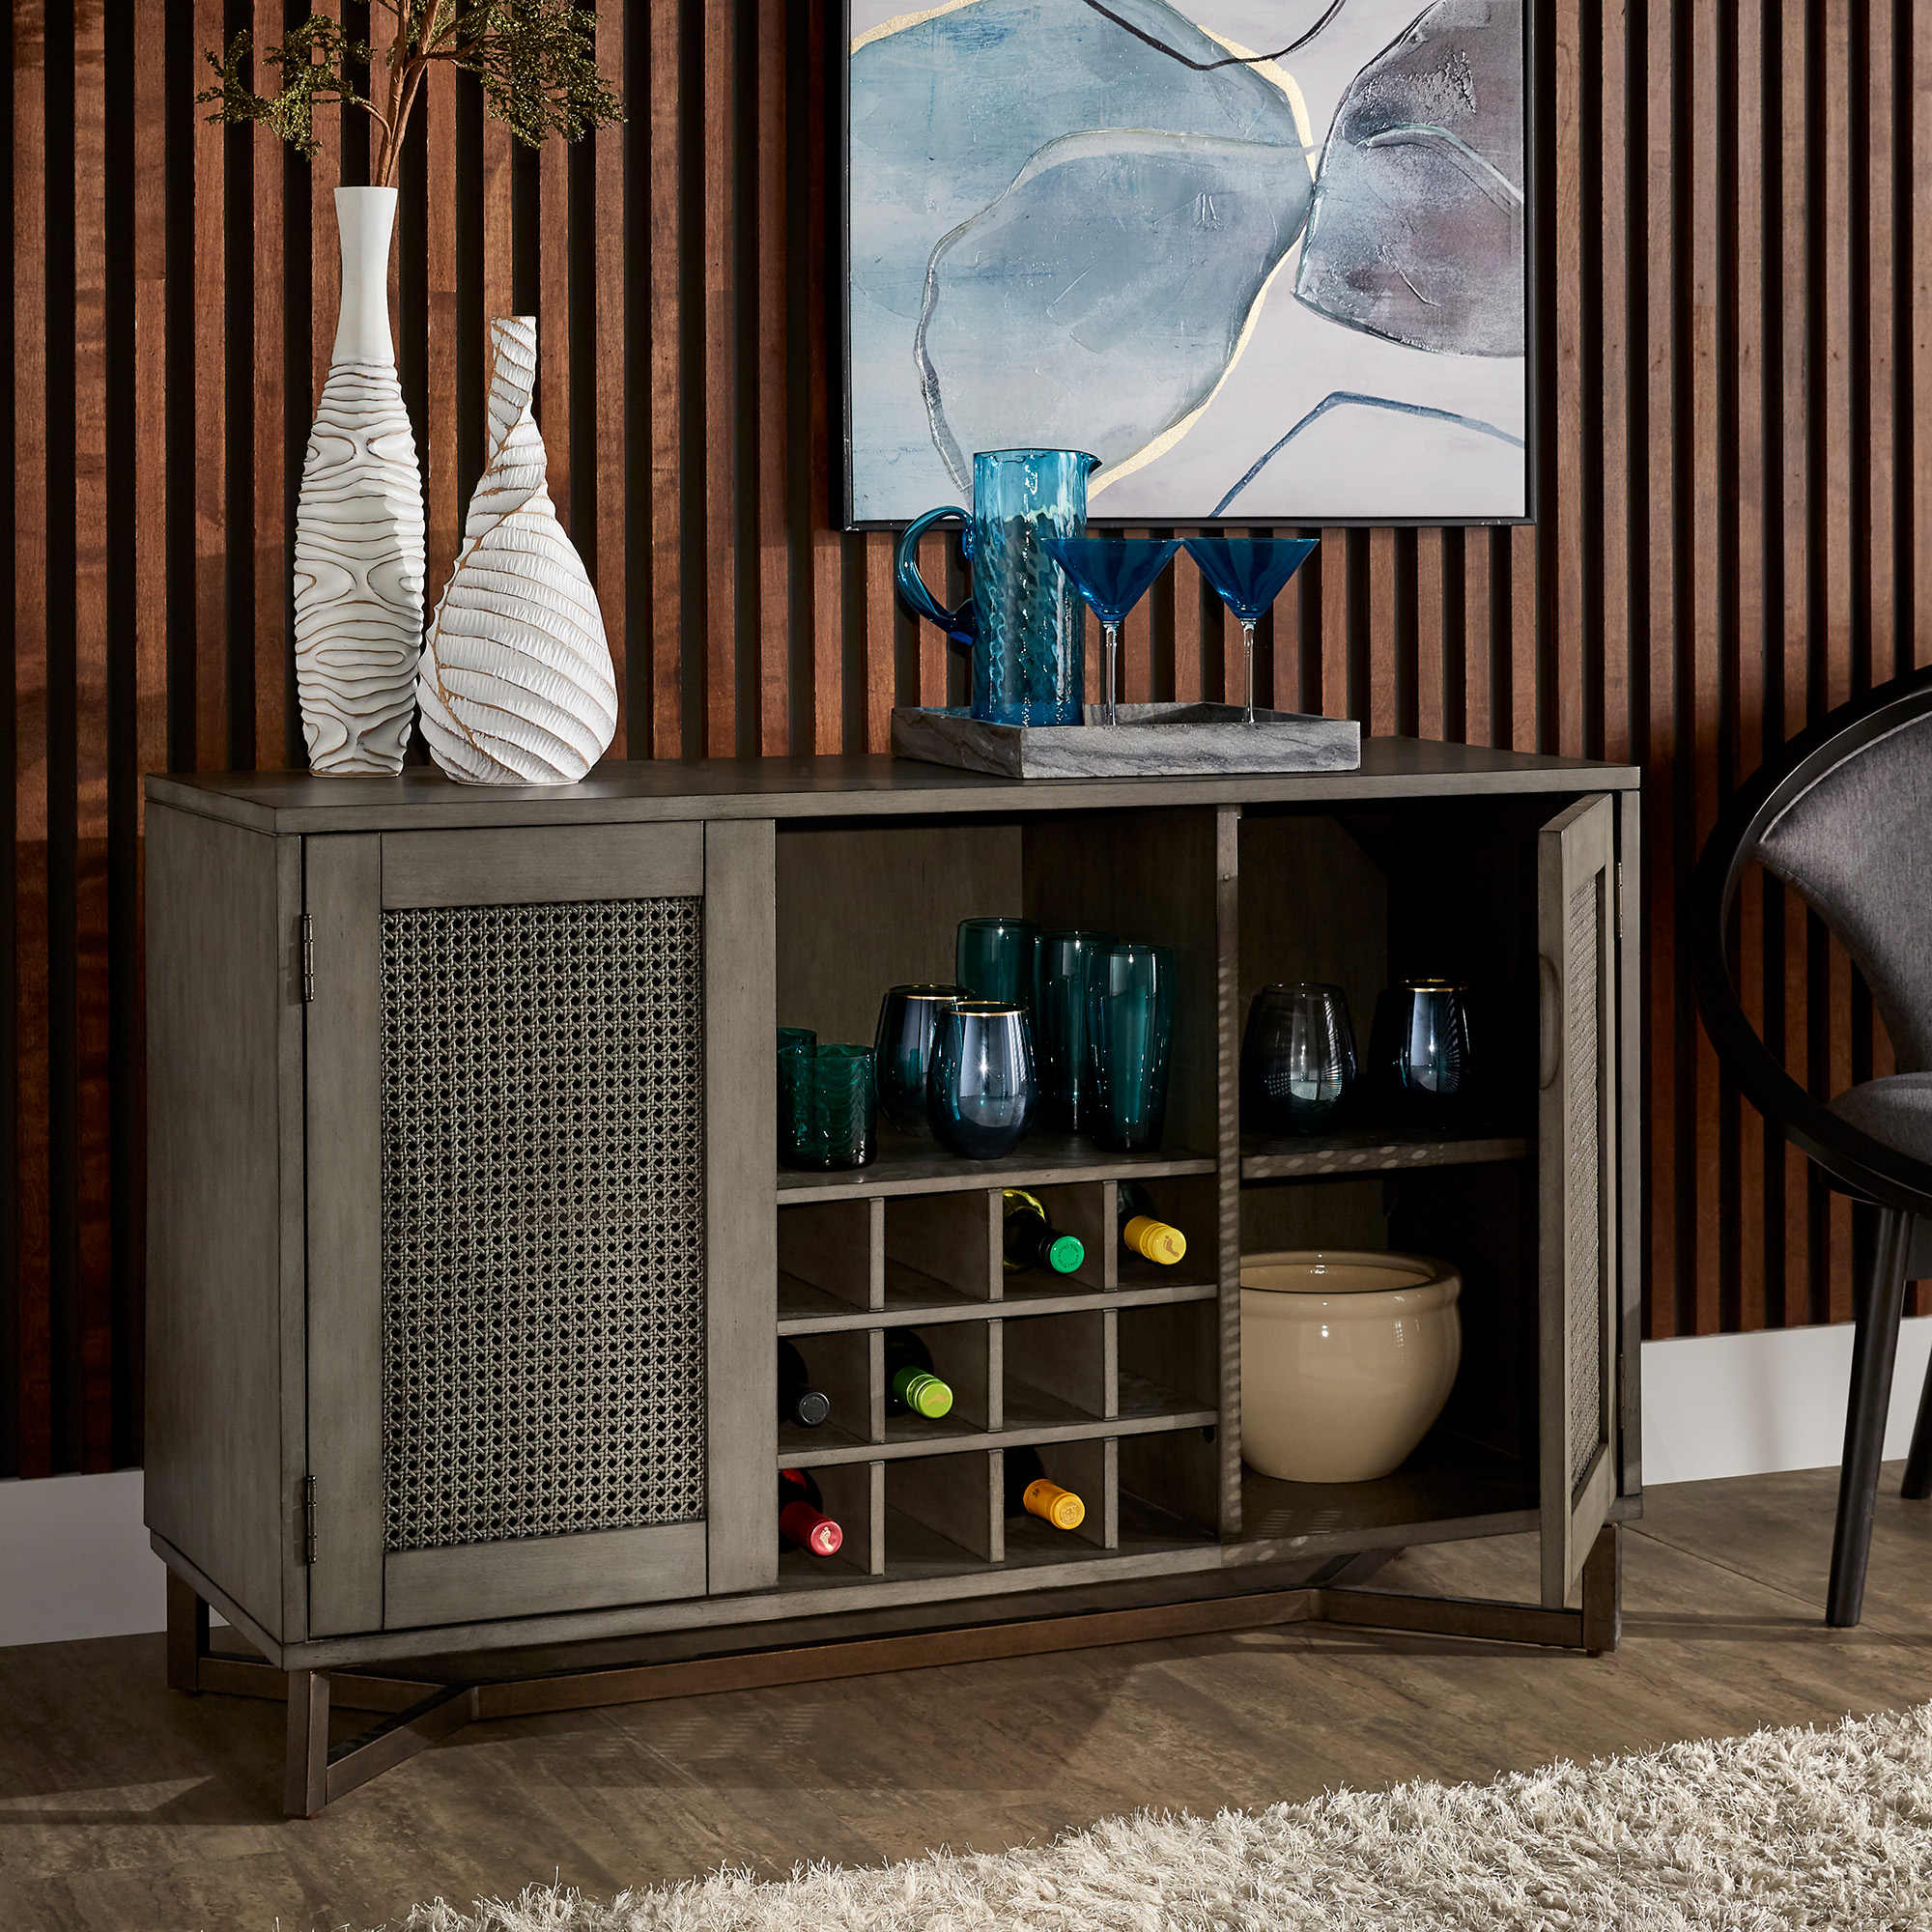 This is the Grey Wood Rattan Wine Rack Buffet Server by iNSPIRE Q Modern. It's multitude of storage capacity allows it to be used anywhere in the home.